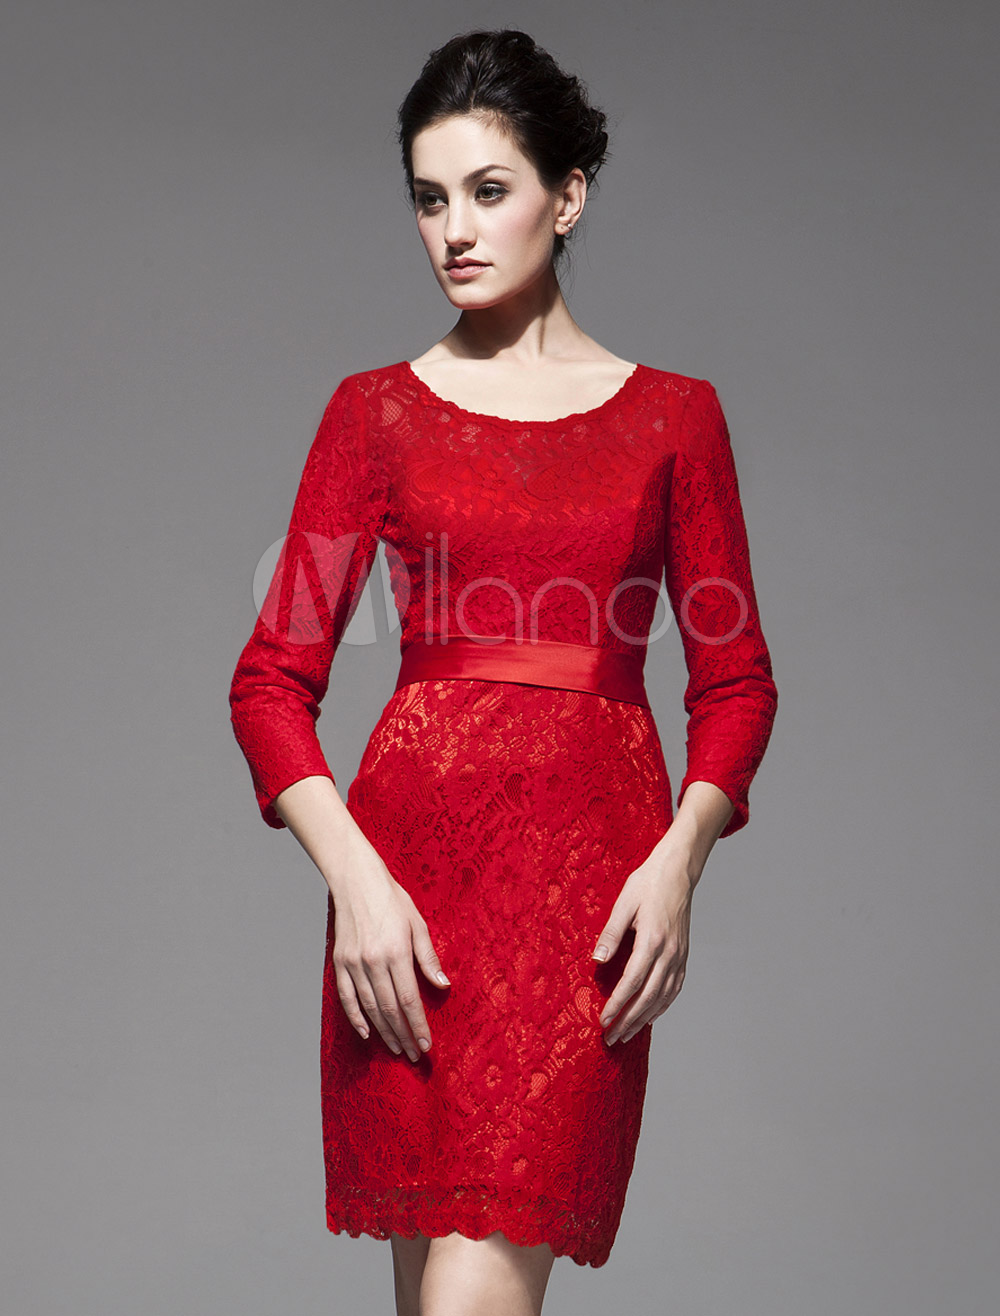 Red Sheath Jewel Neck Lace Mother of the Bride Dress with 3/4 Length Sleeves Wedding Guest Dress photo